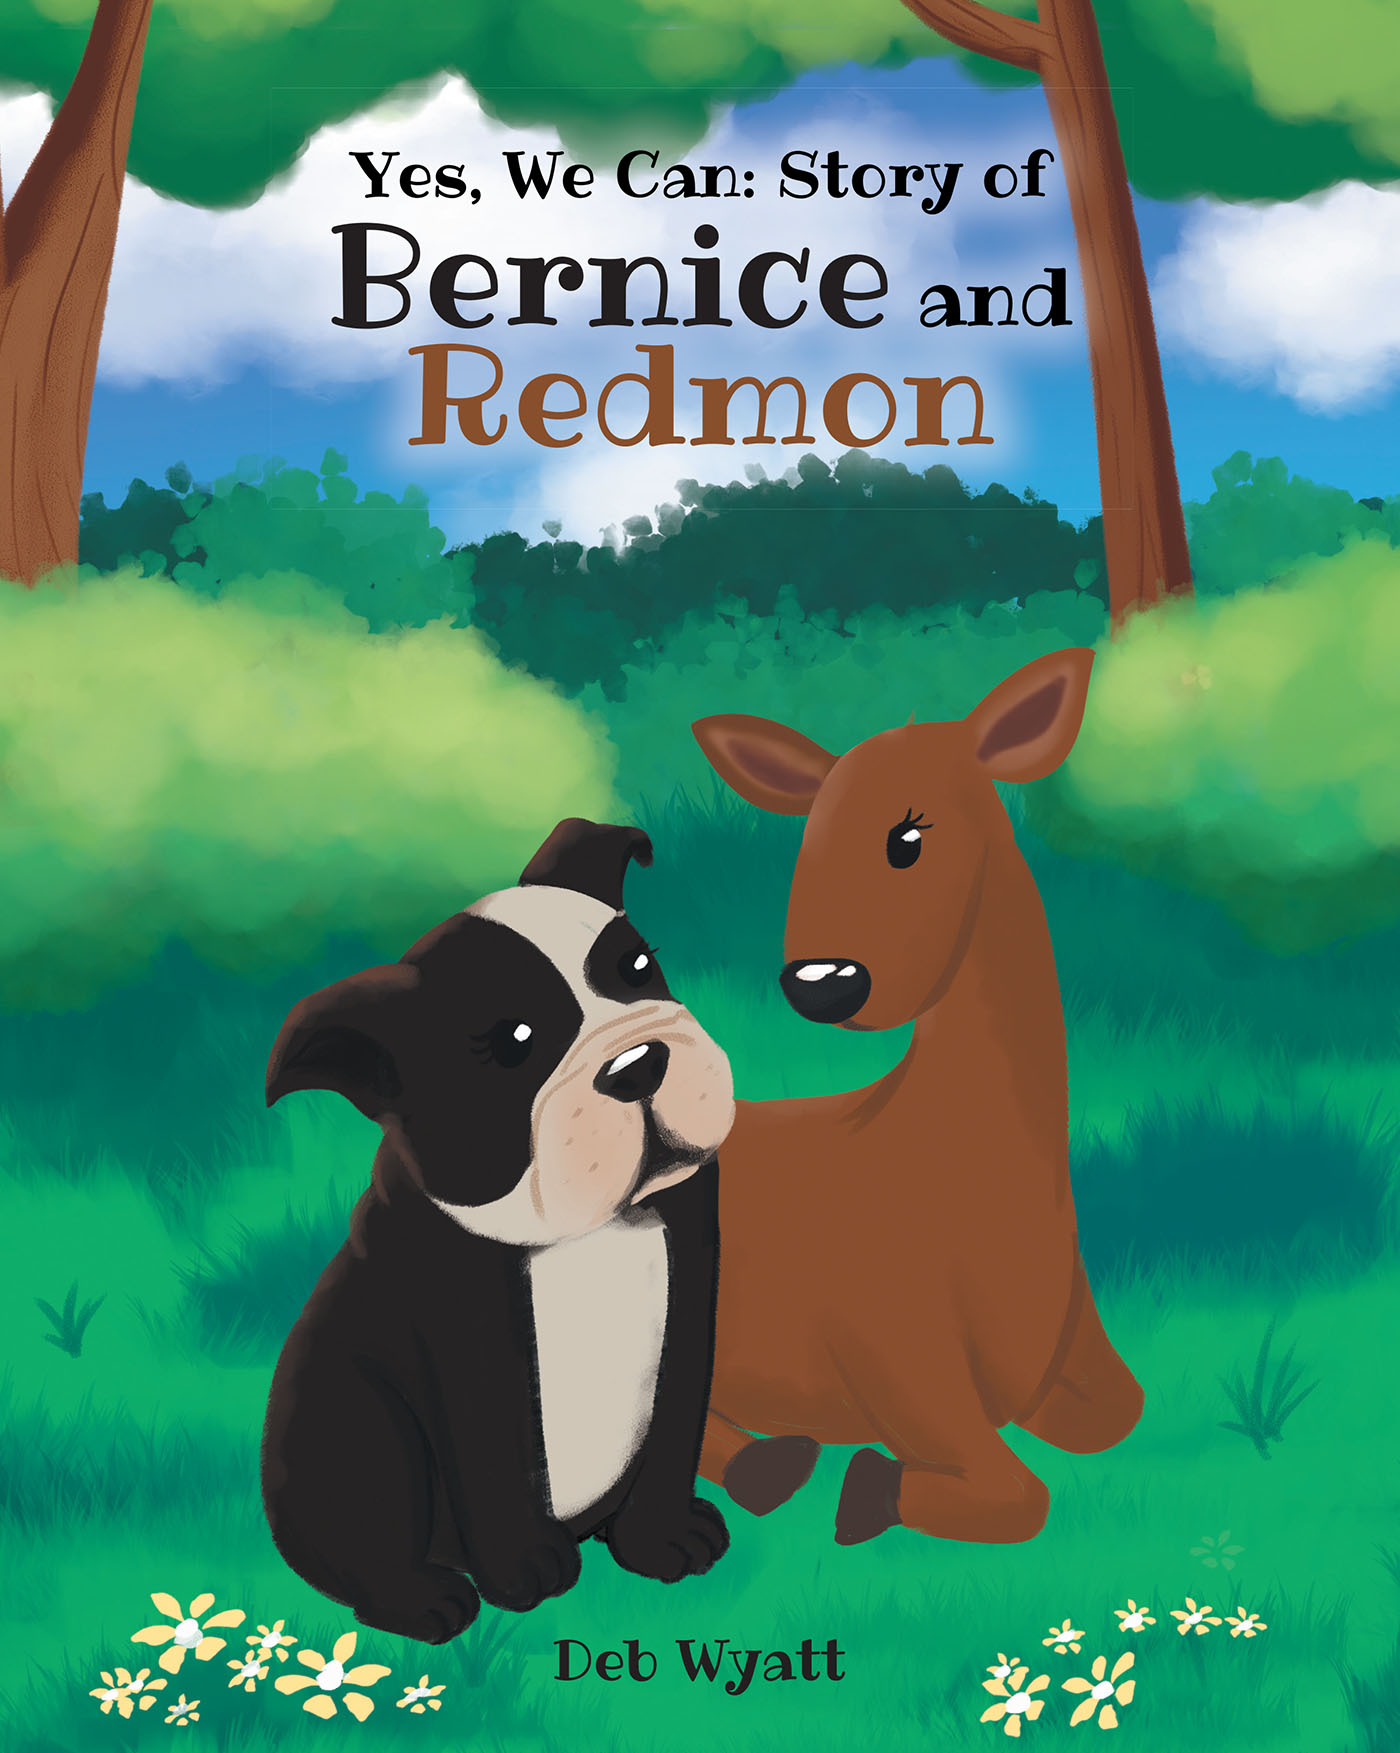 Deb Wyatt’s New Book, "Yes We Can: Story of Bernice and Redmon," is a Delightful Story of a Brave Bulldog Who Sets Off to Help Her Friend in Her Time of Need